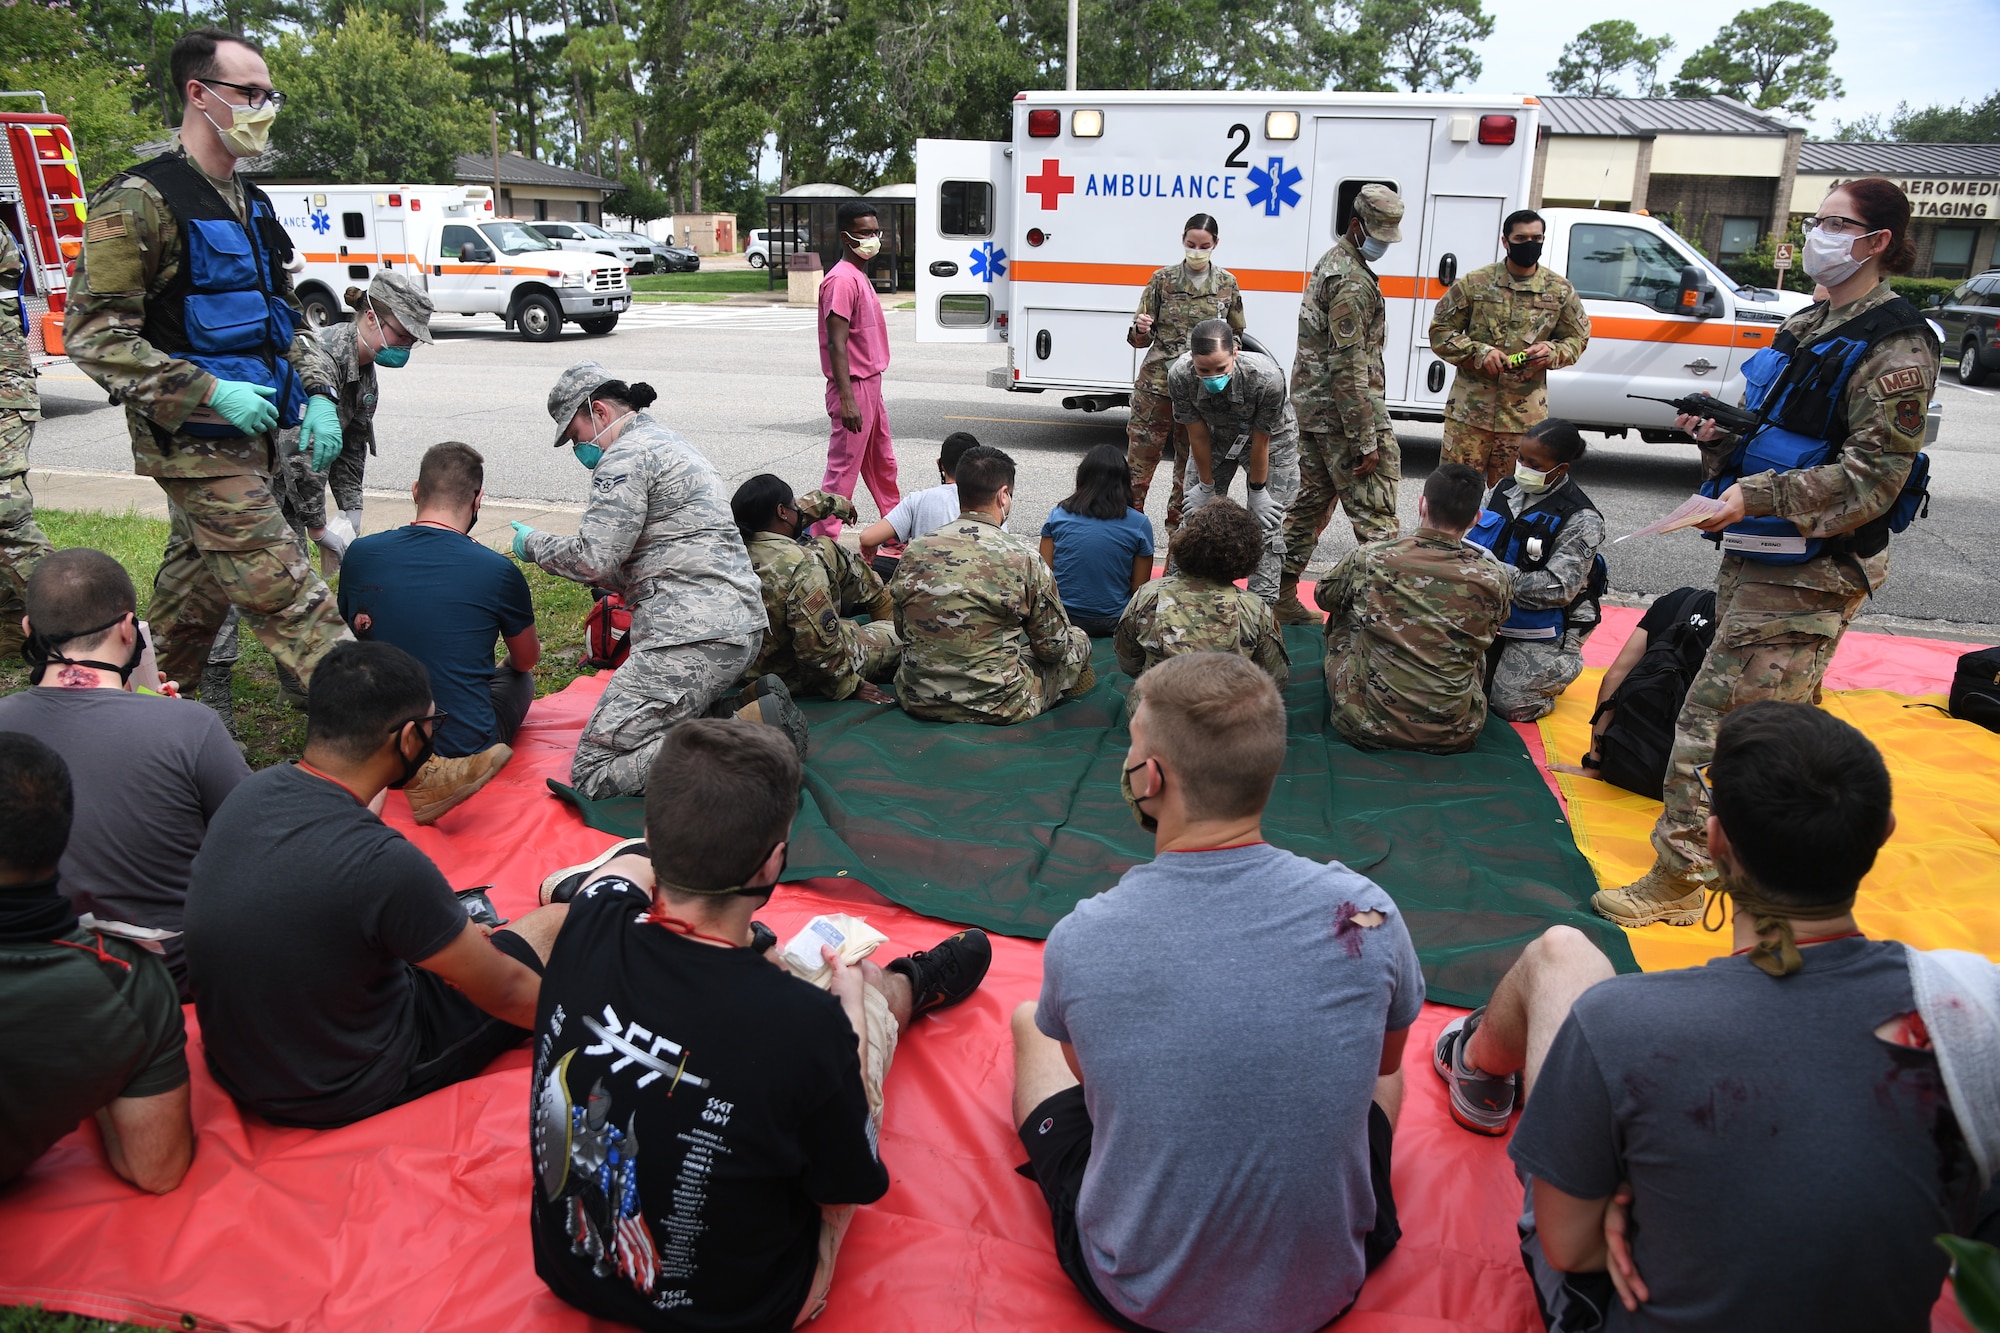 Keesler first responders medically assess actors portraying victims during an active shooter exercise outside the Sablich Center at Keesler Air Force Base, Mississippi, Aug. 20, 2020. The scenario included two active duty Air Force members who simulated opening fire inside the Sablich Center in order to test the base's ability to respond to and recover from a mass casualty event. (U.S. Air Force photo by Kemberly Groue)